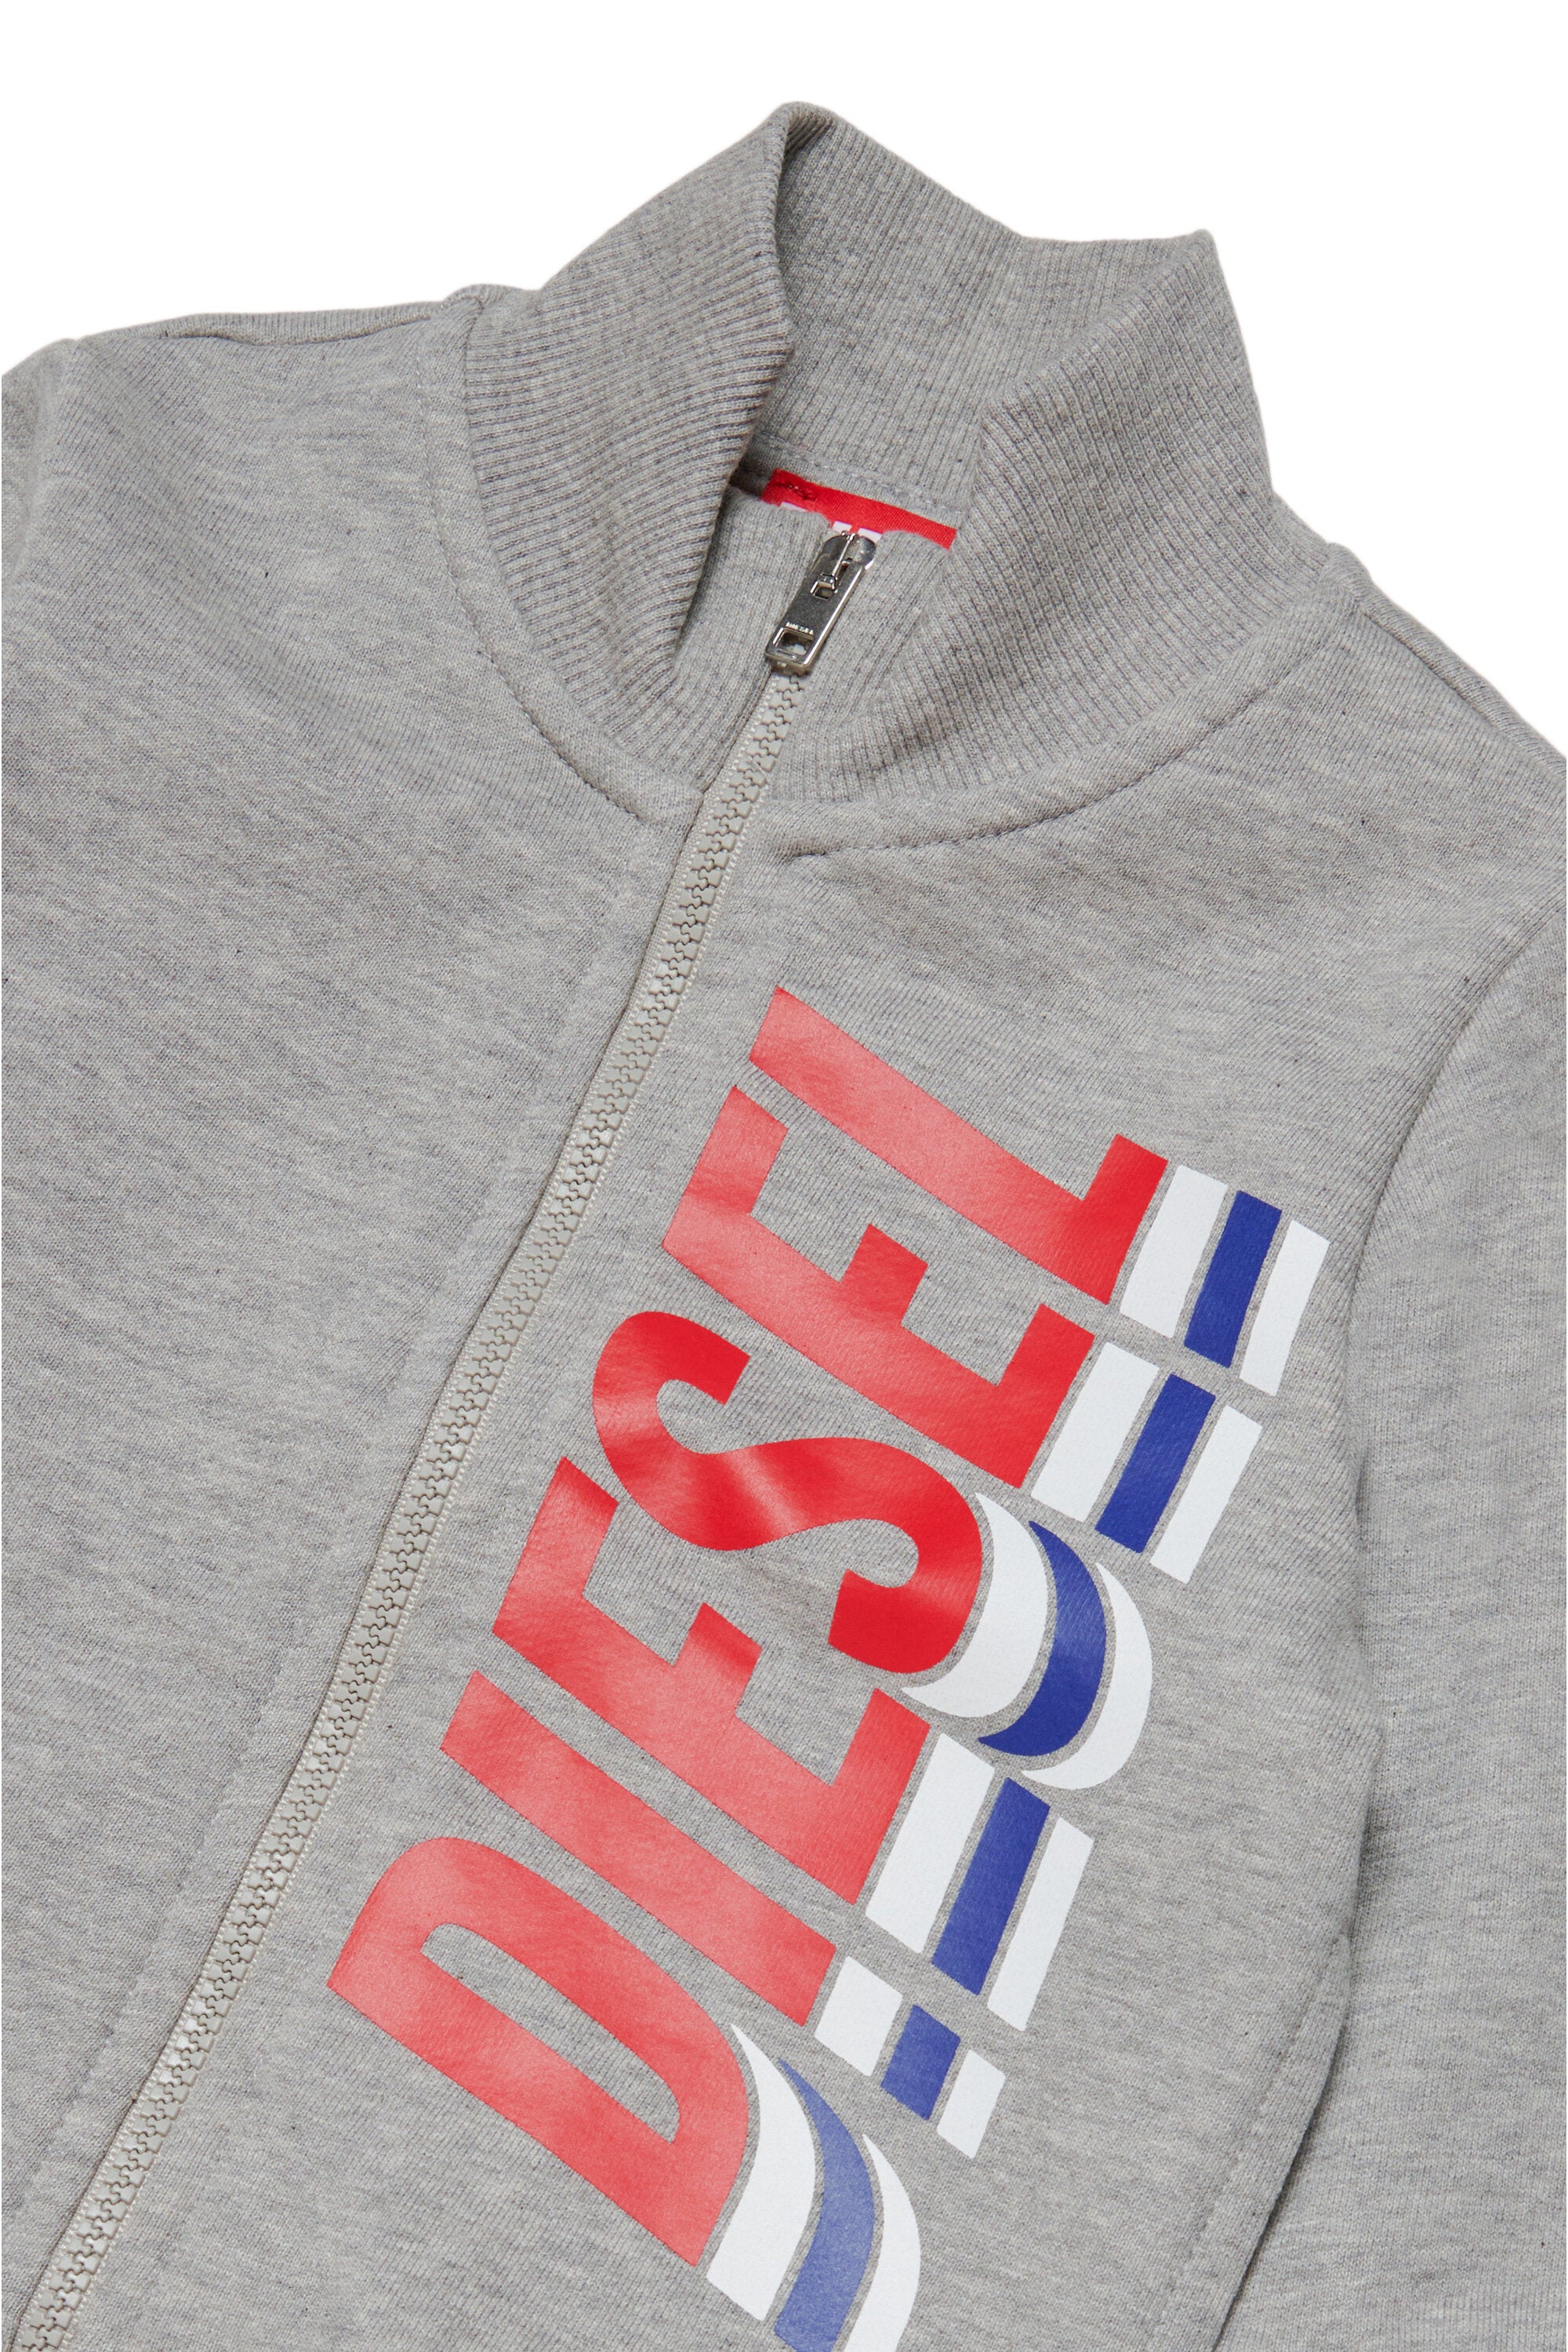 Cotton terry sweatshirt with zip and dynamic logo